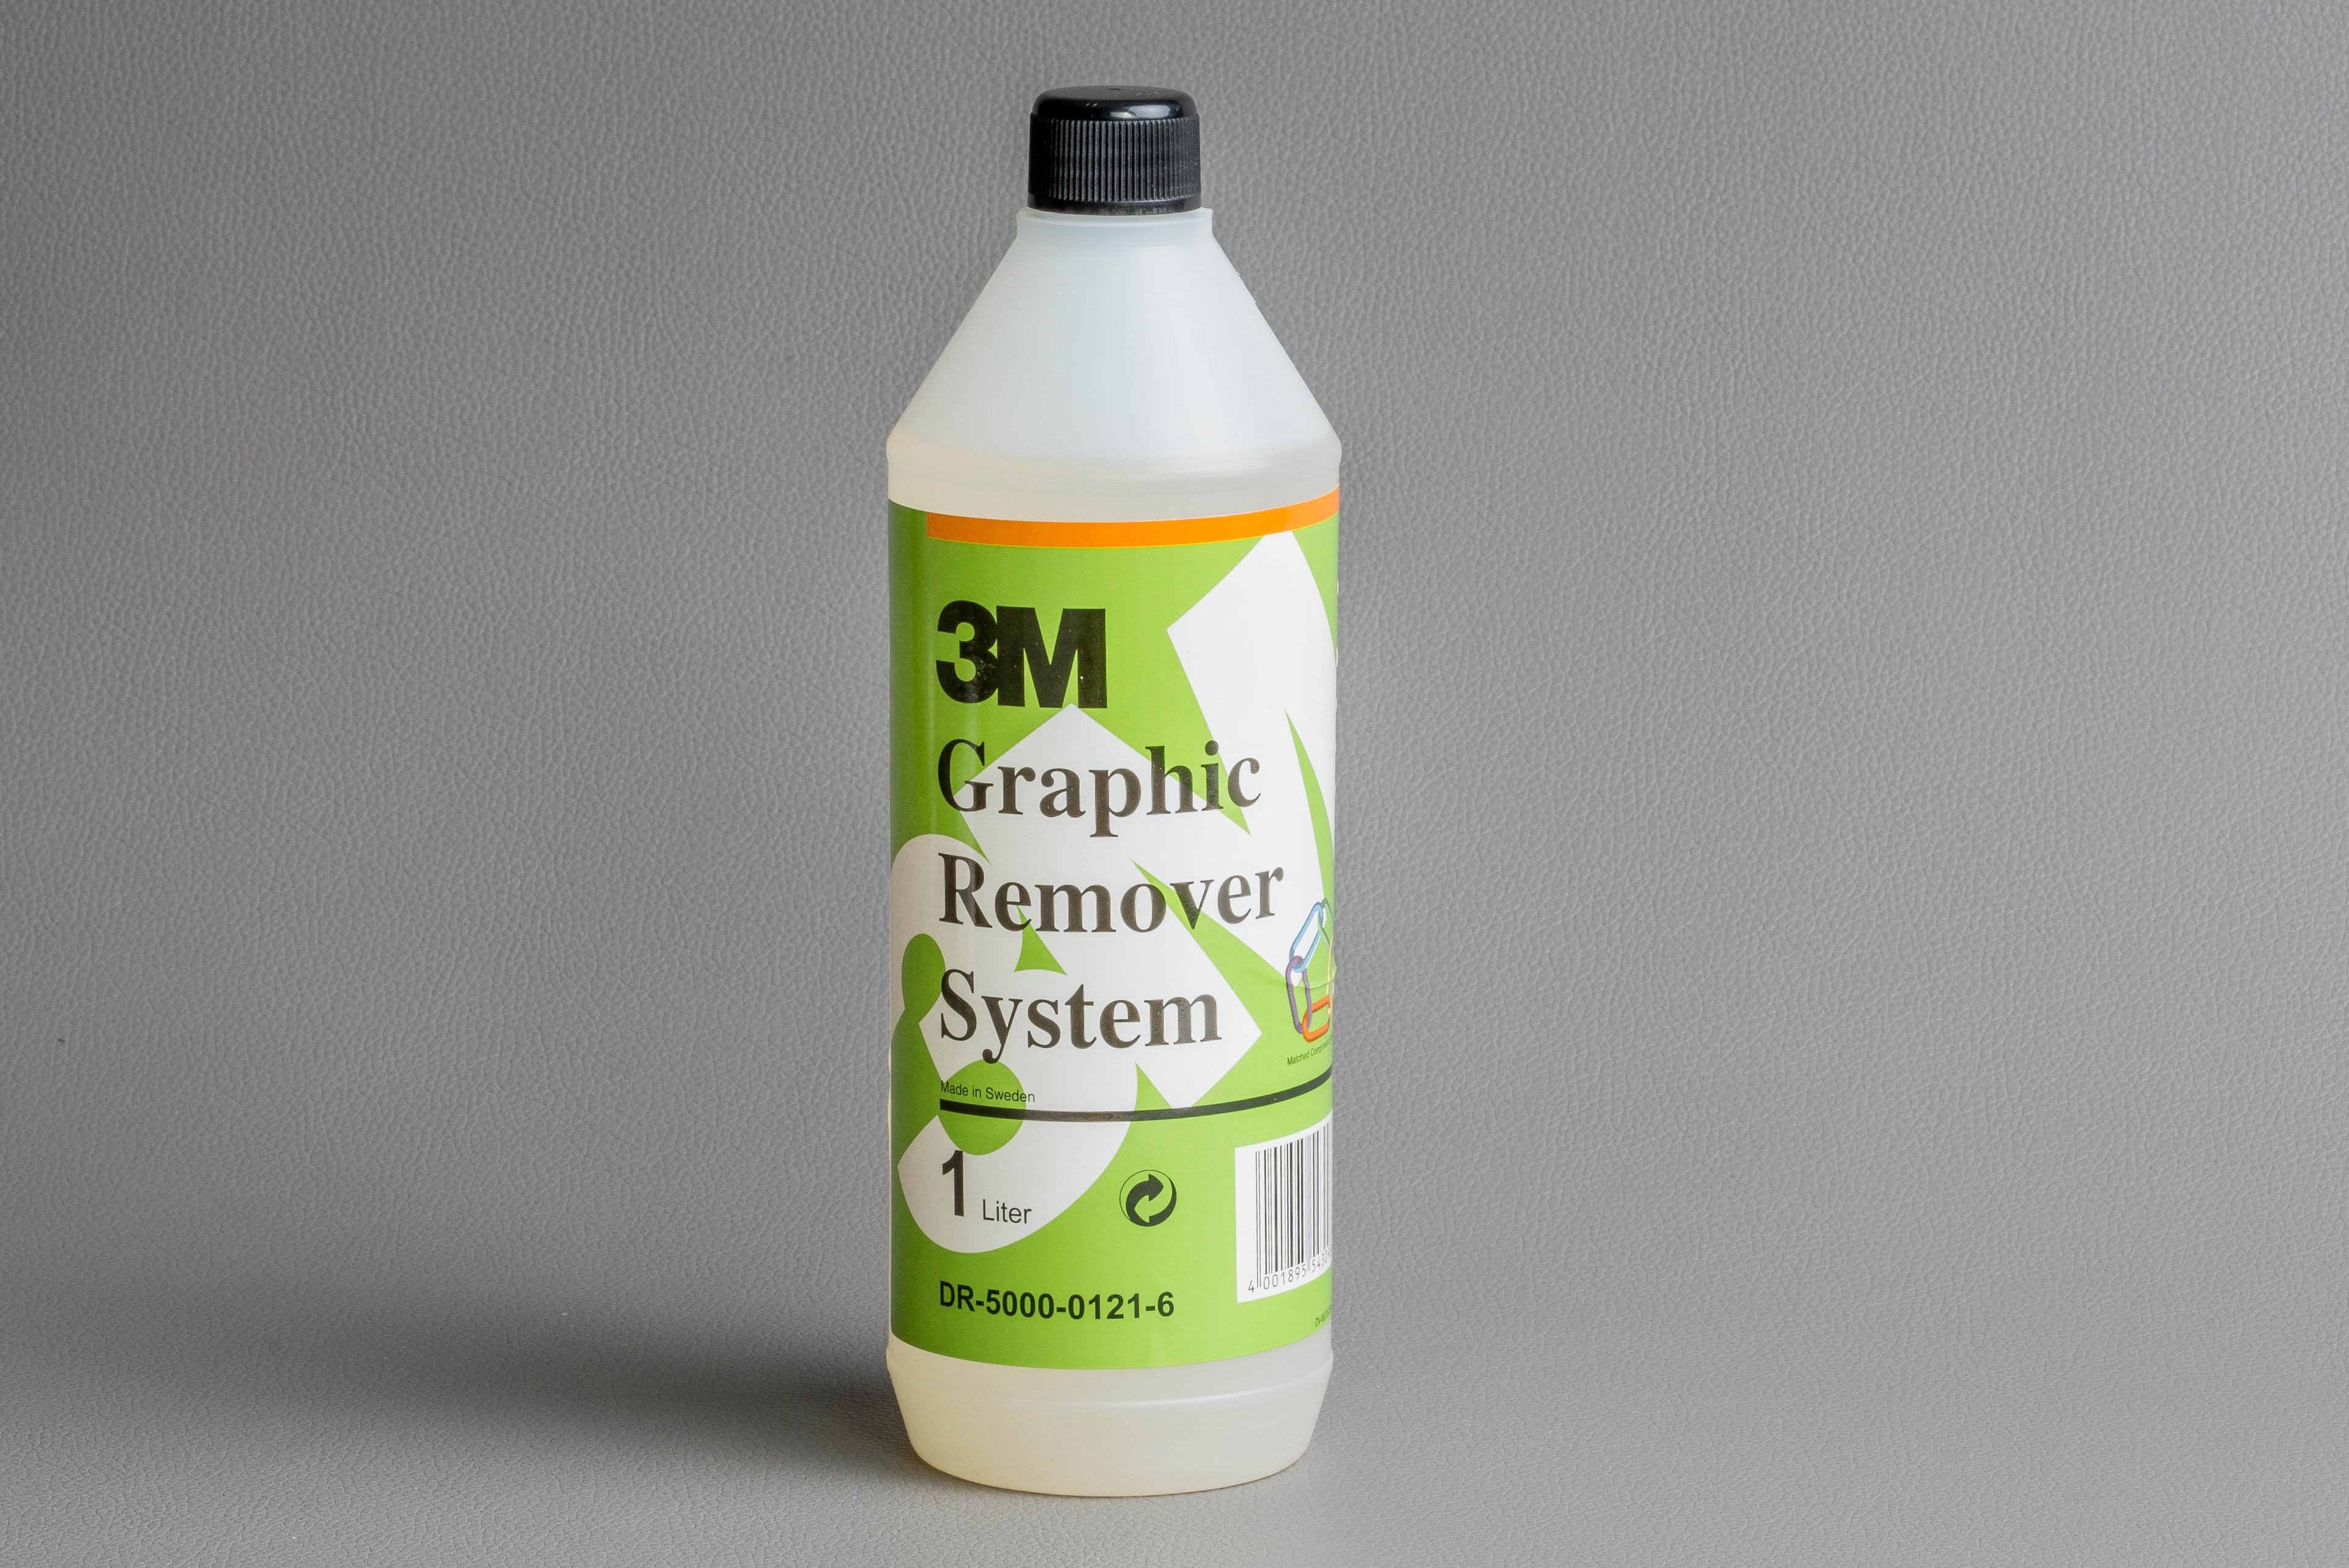 Foto: 3M Graphic Remover System - 1 ltr.